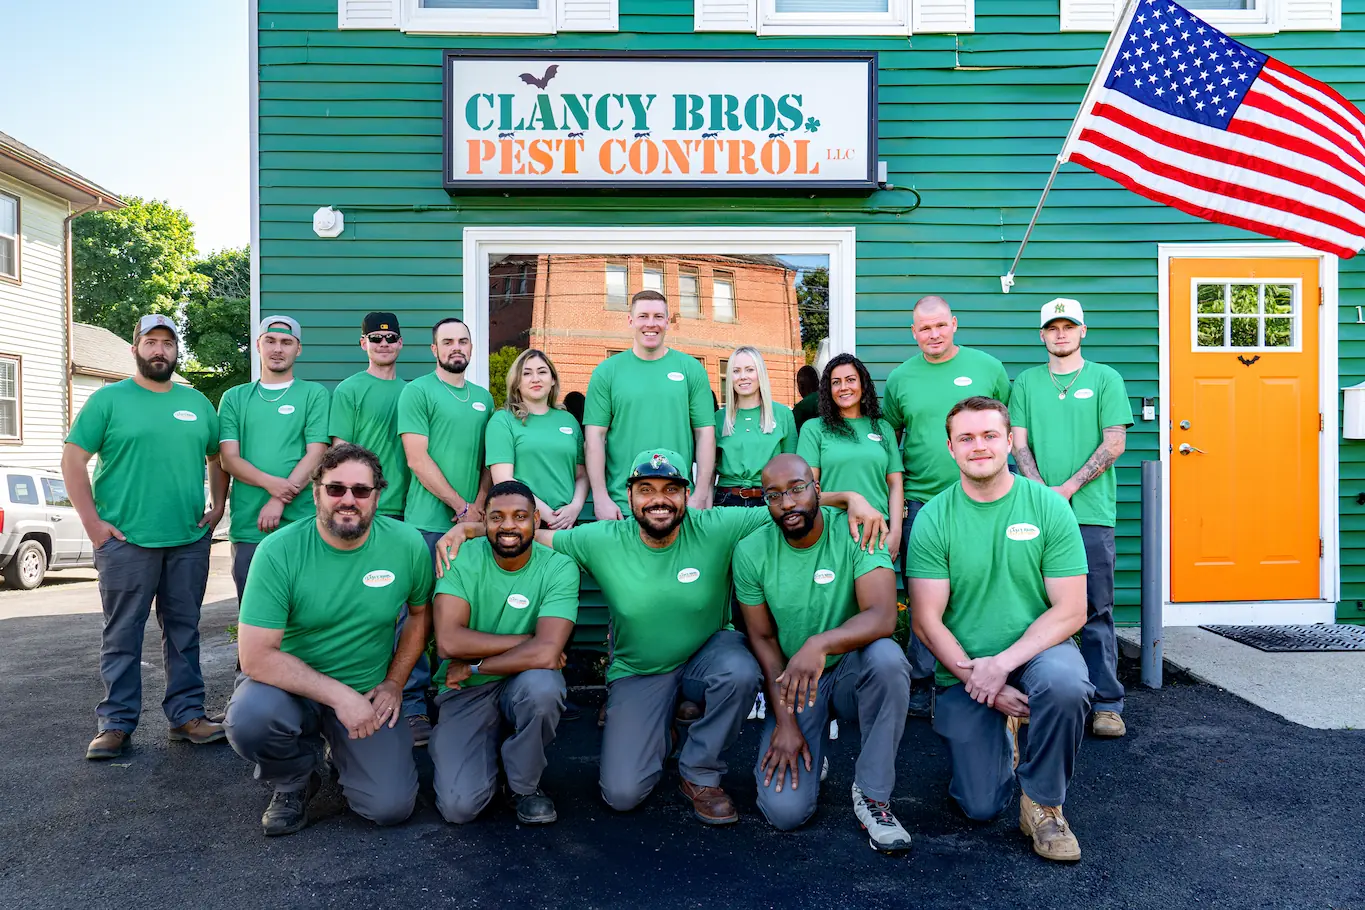 Clancy Brothers Pest Control team in front of building